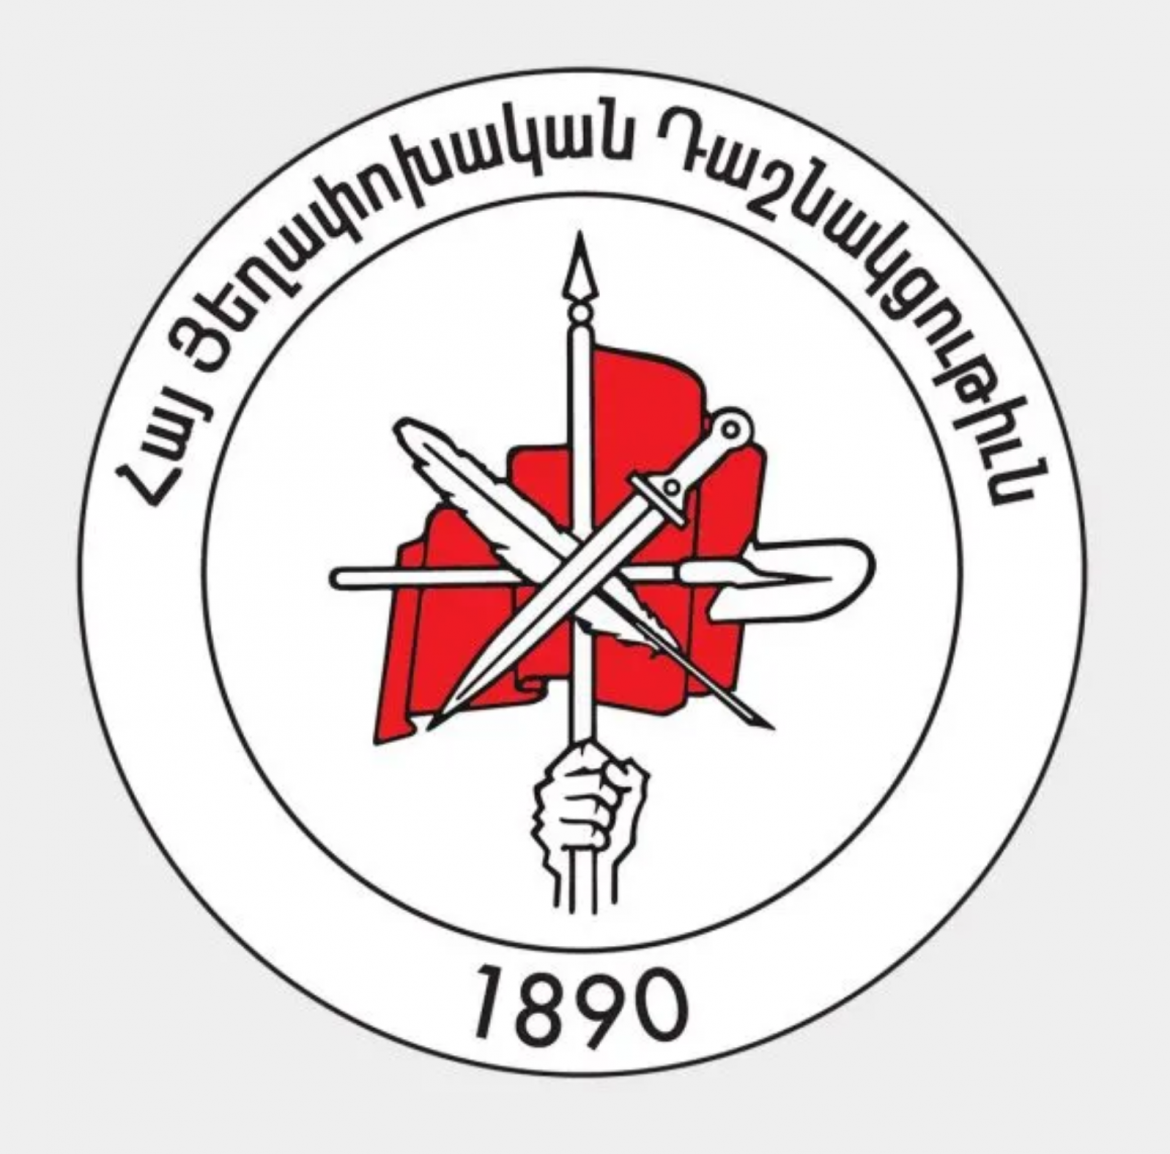 Statement of the Armenian Revolutionary Federation Western U.S.A. Central Committee